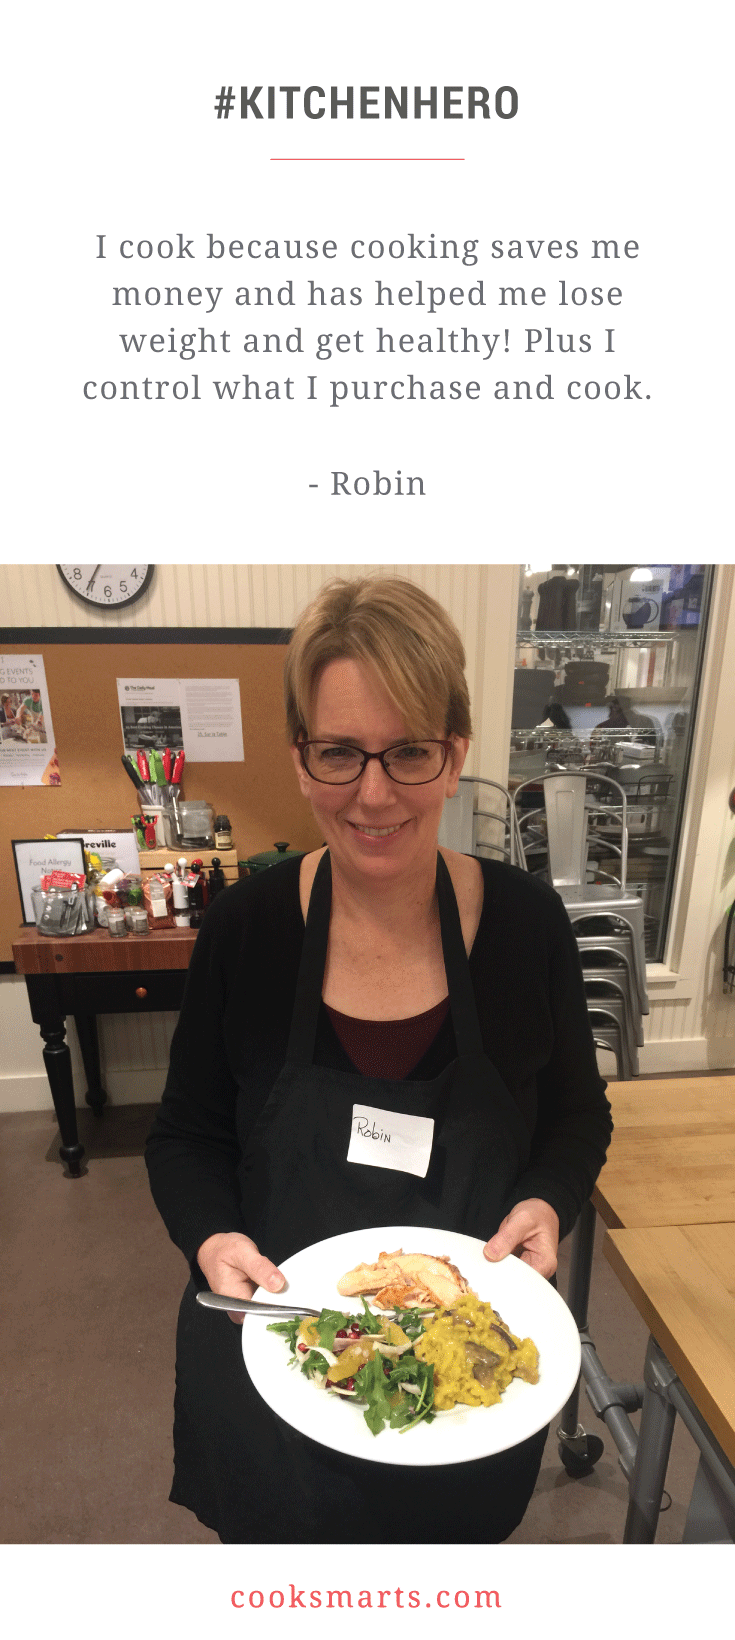 Robin: Home Cooking Beats Eating Out | Cook Smarts